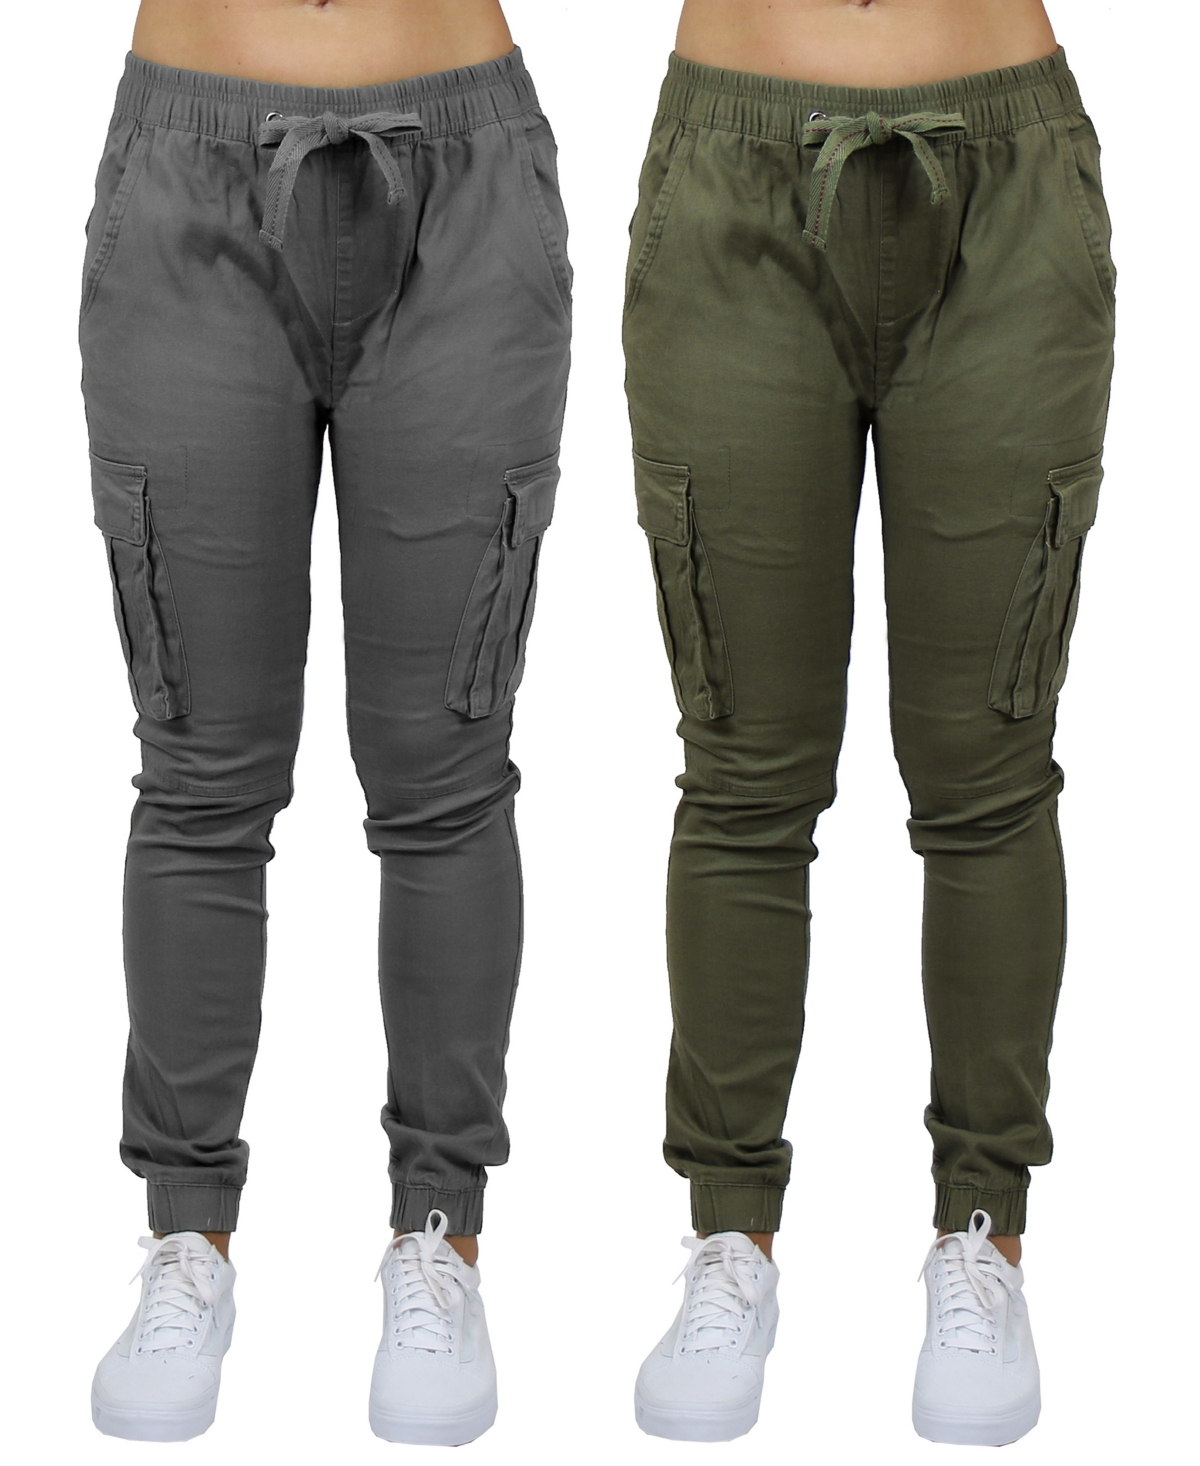 Galaxy By Harvic Women's Loose Fit Cotton Stretch Twill Cargo Joggers Set, 2 Pack In Gray,olive